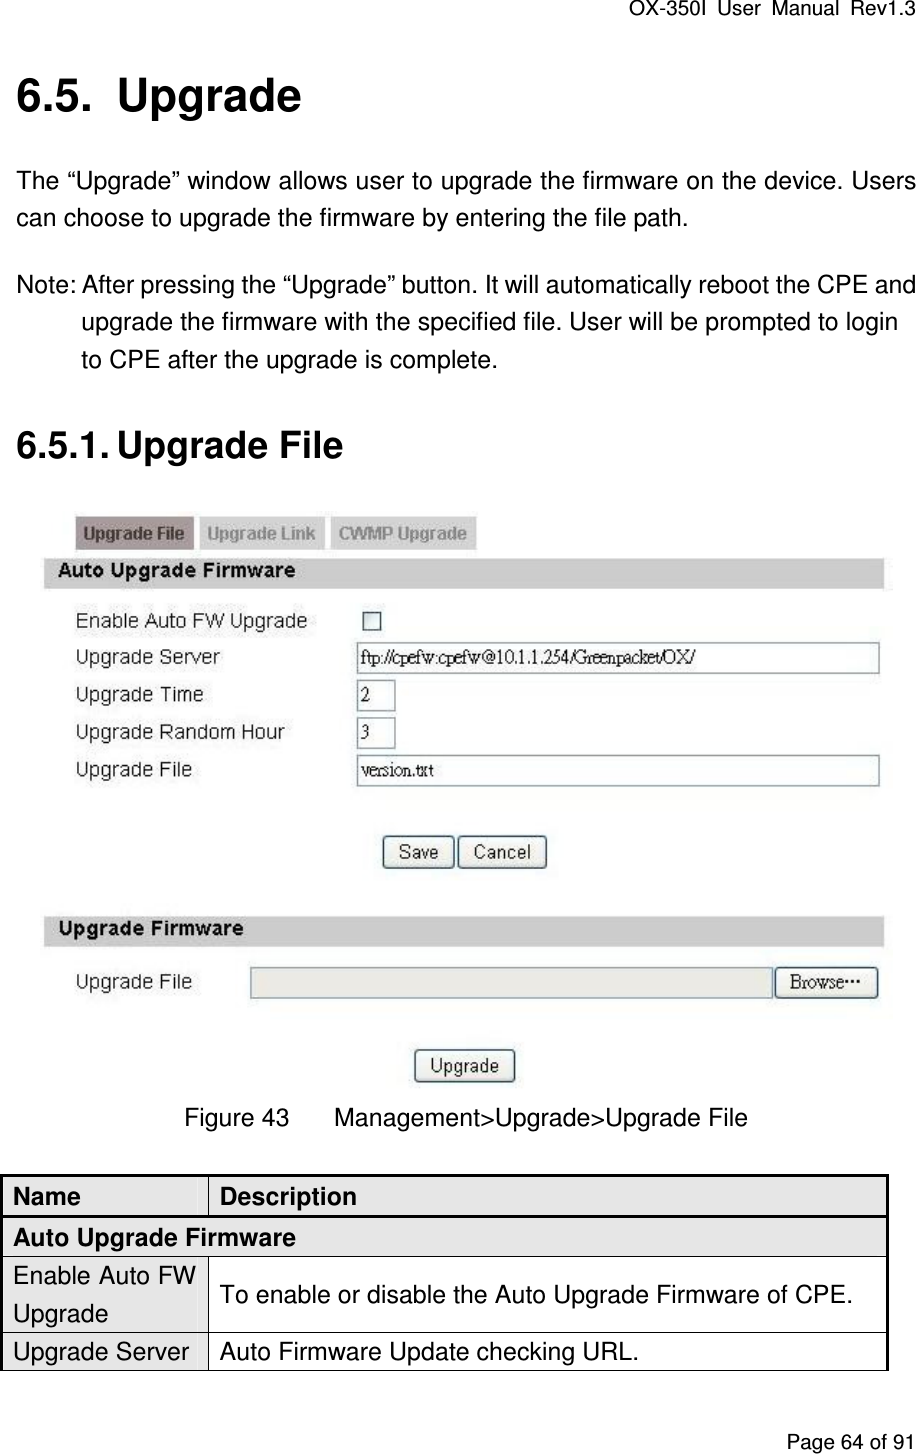 OX-350I  User  Manual  Rev1.3 Page 64 of 91 6.5.  Upgrade The “Upgrade” window allows user to upgrade the firmware on the device. Users can choose to upgrade the firmware by entering the file path. Note: After pressing the “Upgrade” button. It will automatically reboot the CPE and upgrade the firmware with the specified file. User will be prompted to login to CPE after the upgrade is complete. 6.5.1. Upgrade File    Figure 43  Management&gt;Upgrade&gt;Upgrade File Name  Description Auto Upgrade Firmware Enable Auto FW Upgrade  To enable or disable the Auto Upgrade Firmware of CPE. Upgrade Server Auto Firmware Update checking URL. 